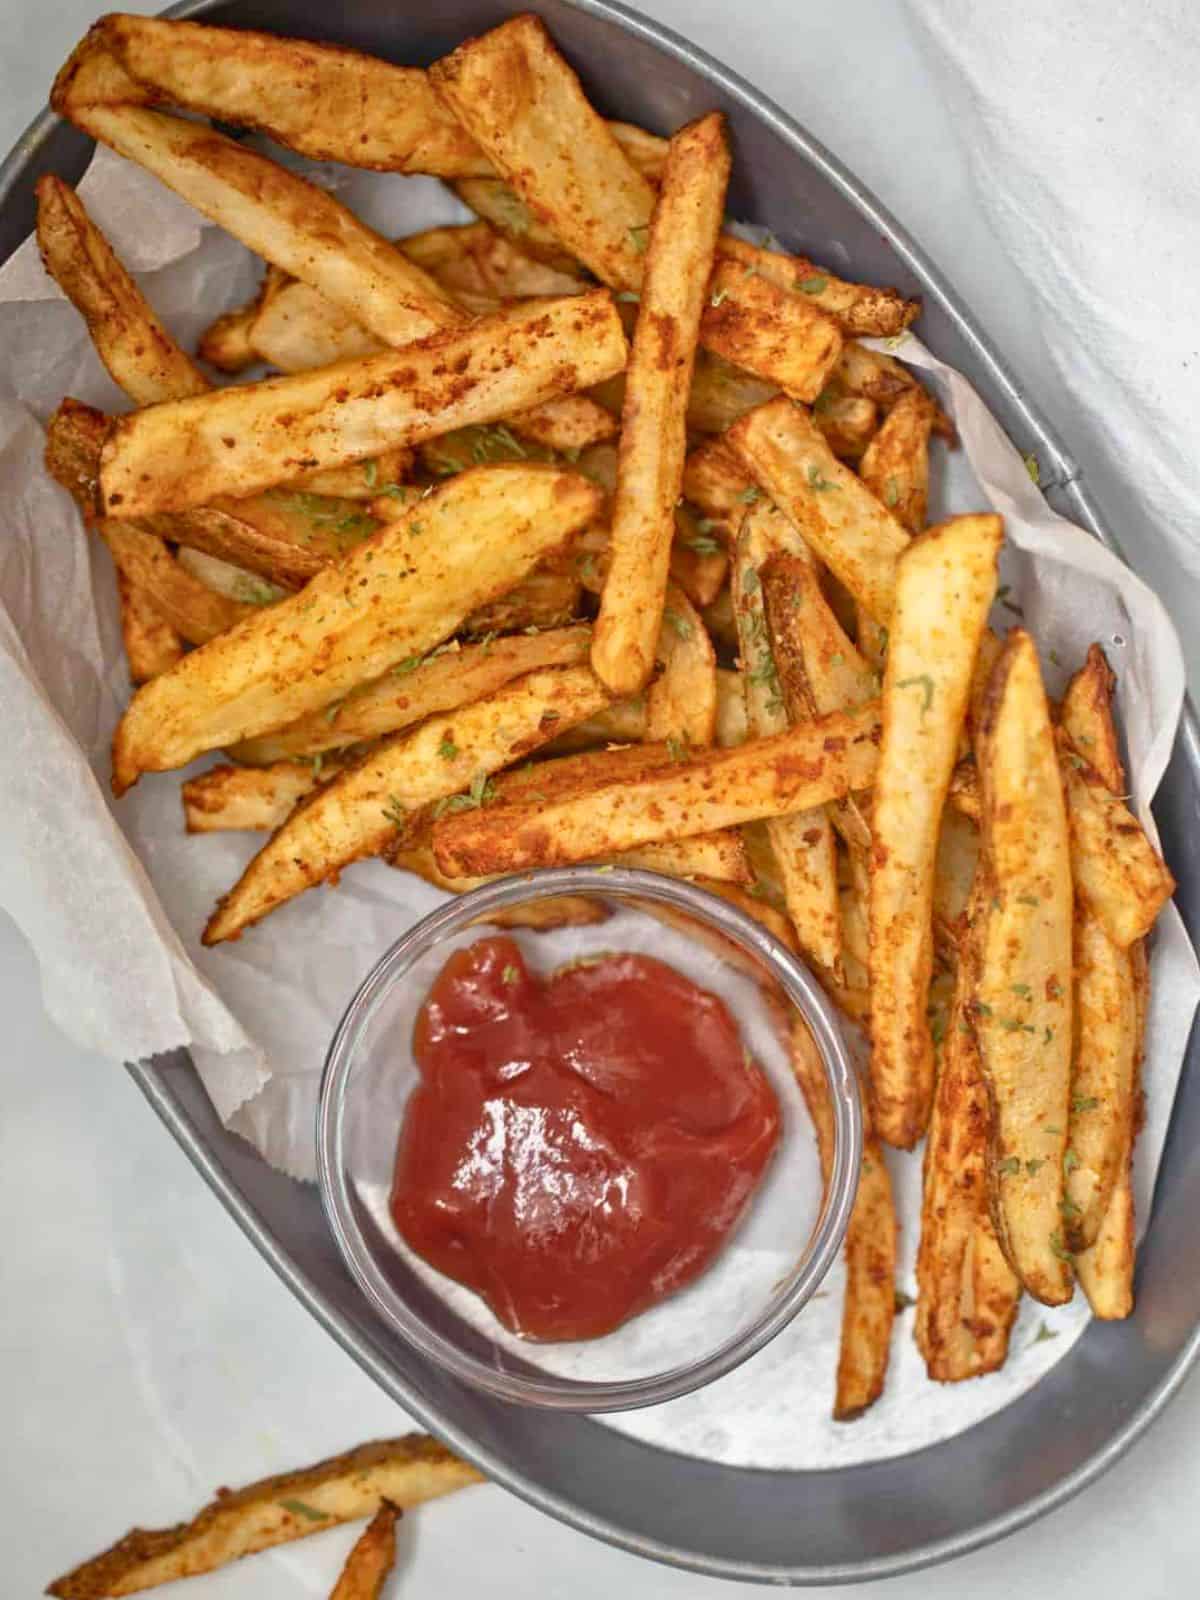 Basket of air fryer homemade fries served with ketchup.